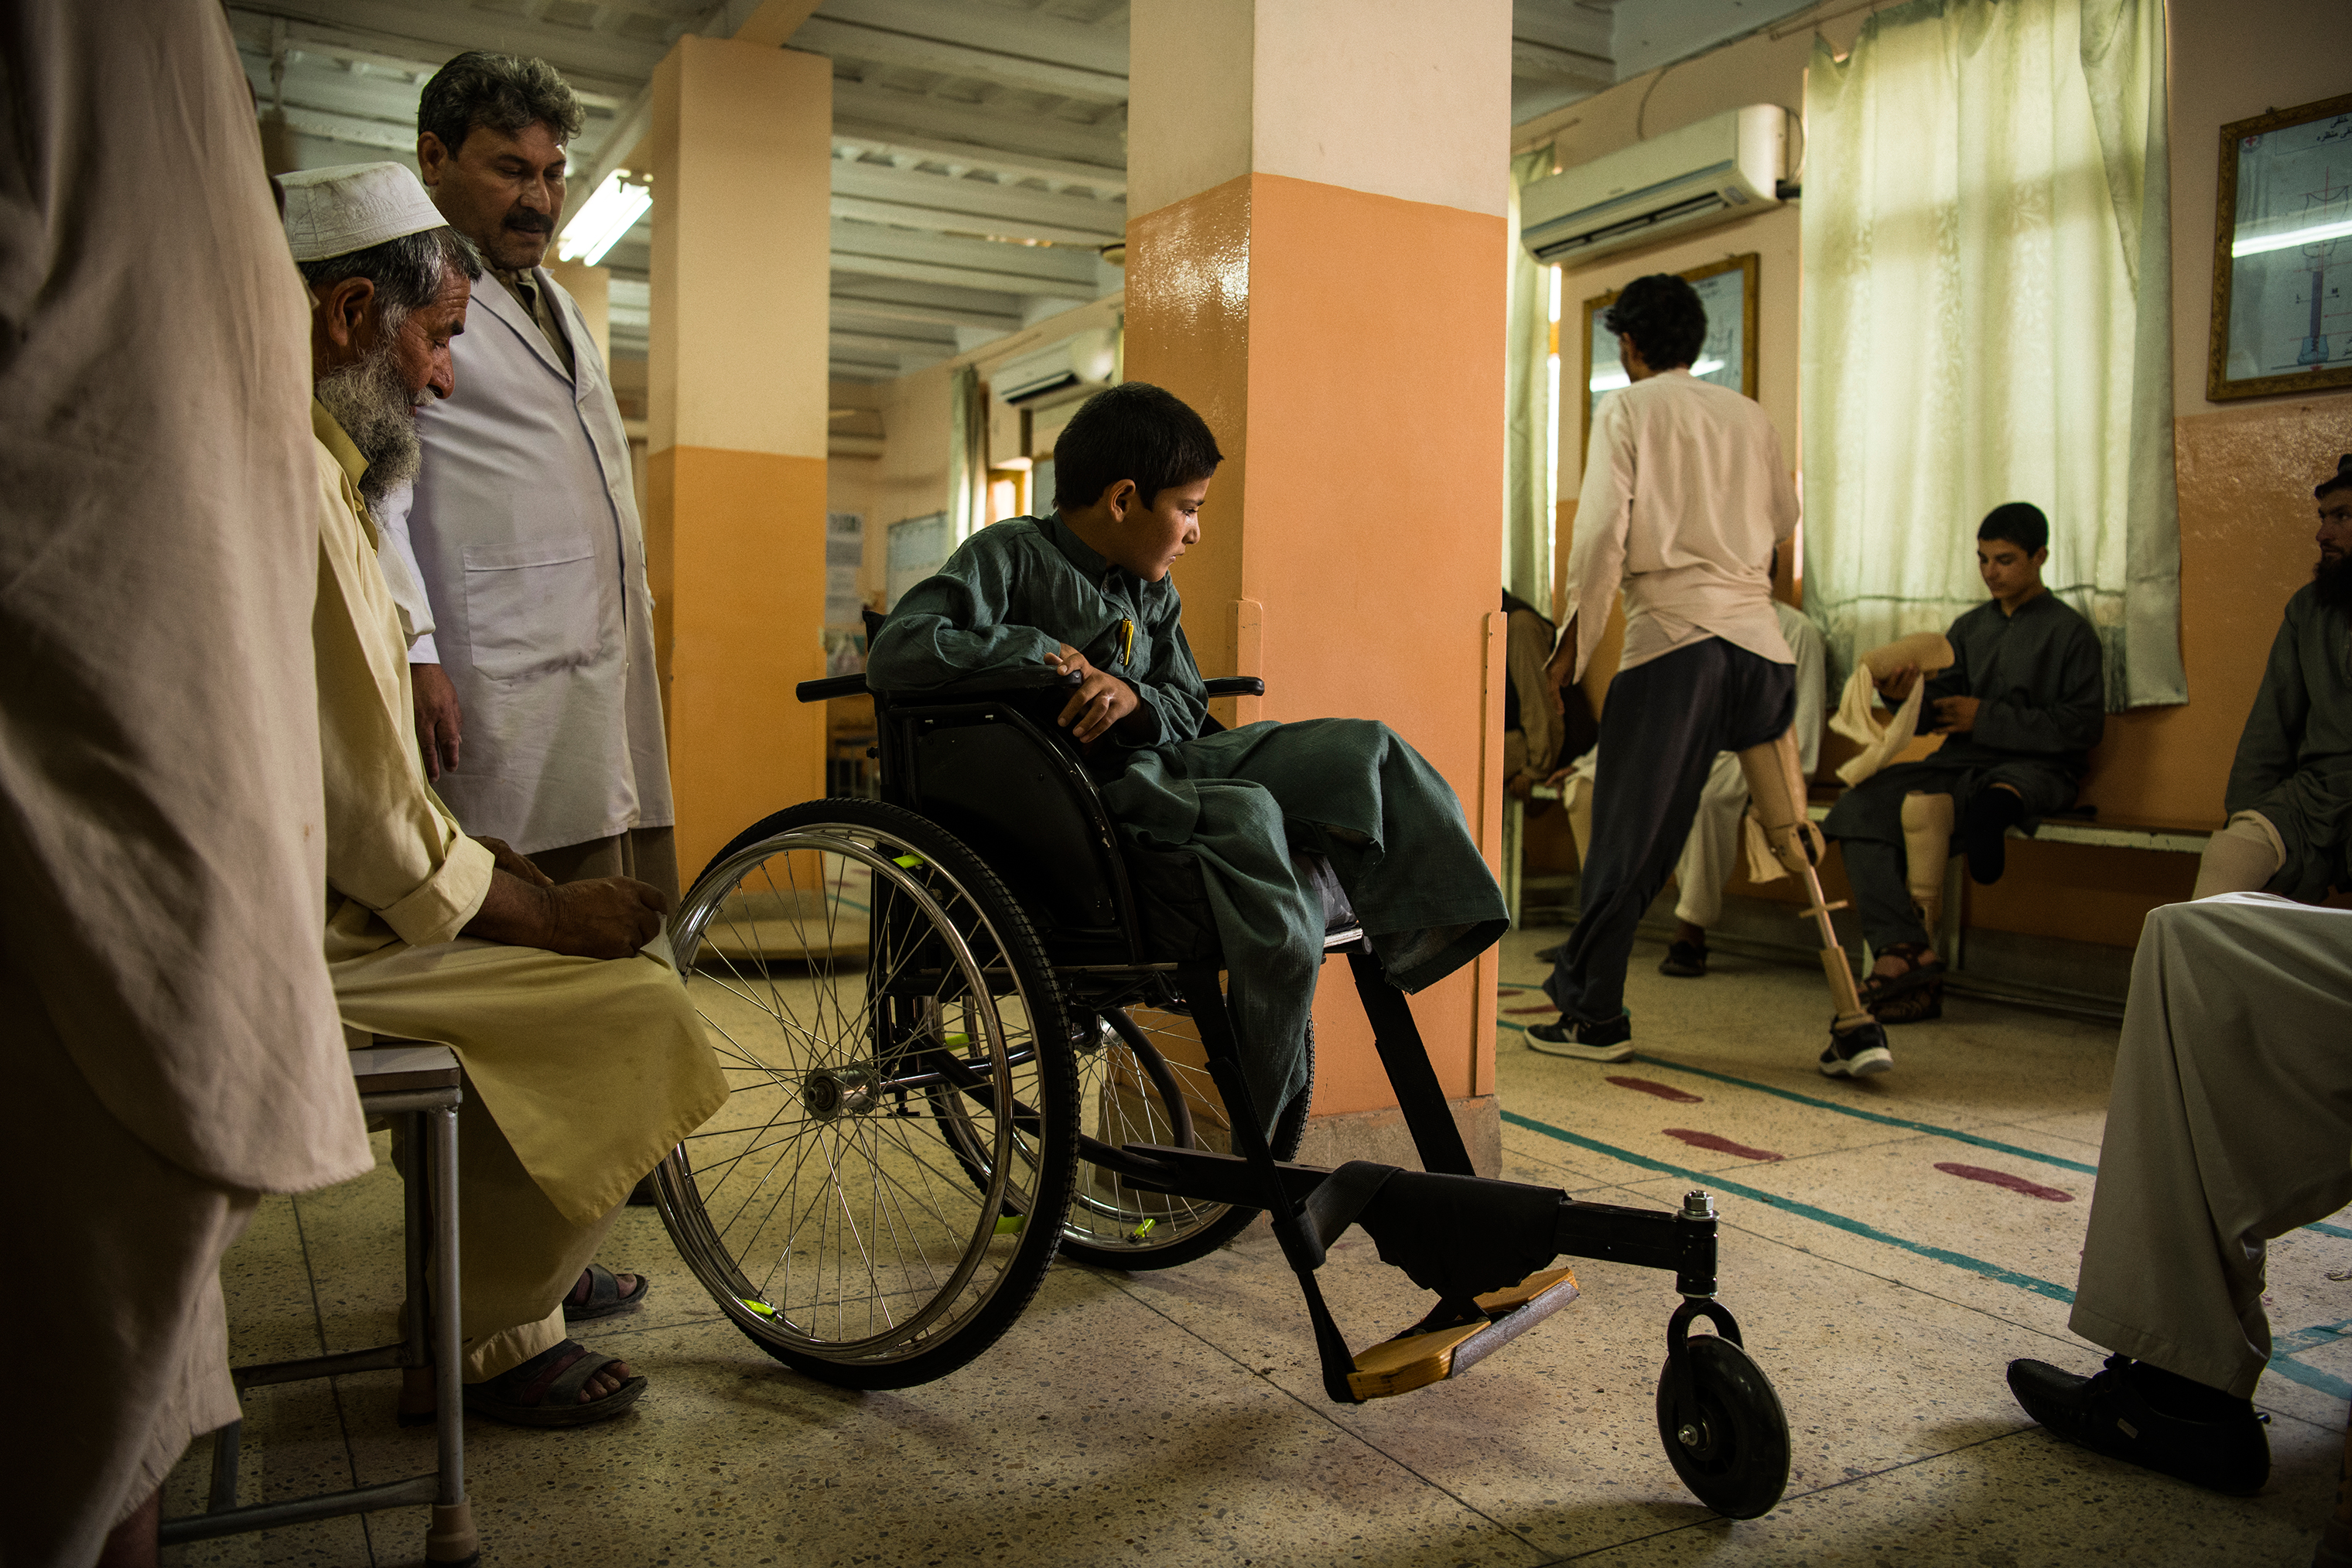 Abdul Rashid watches a patient practice with a prosthetic leg at the orthopedic center on June 27. (Andrew Quilty for TIME)